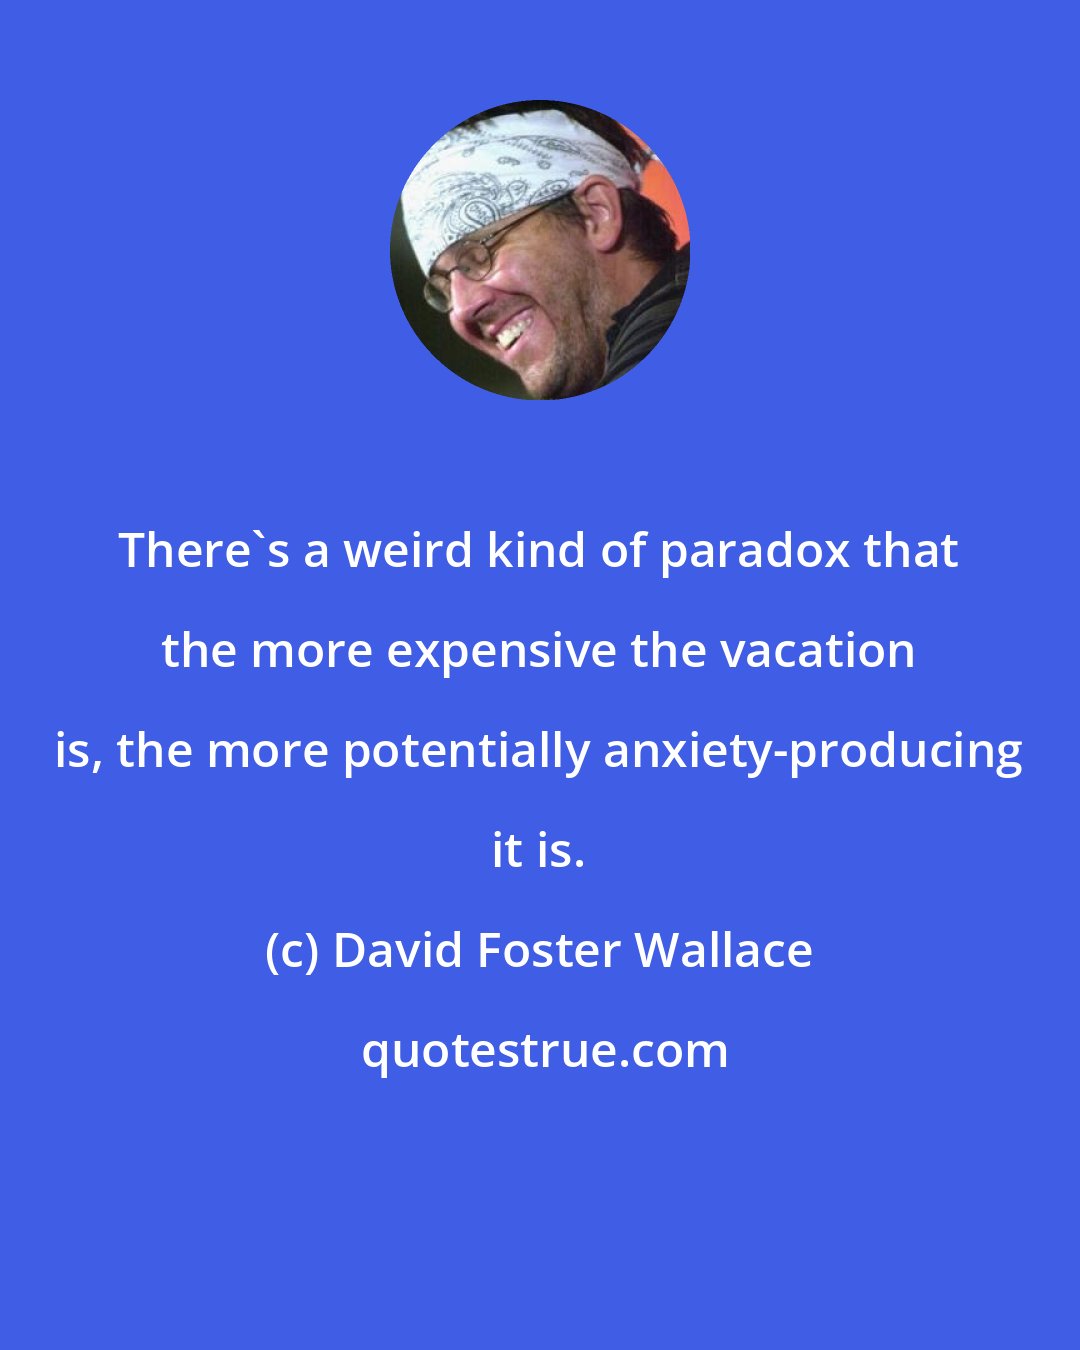 David Foster Wallace: There's a weird kind of paradox that the more expensive the vacation is, the more potentially anxiety-producing it is.